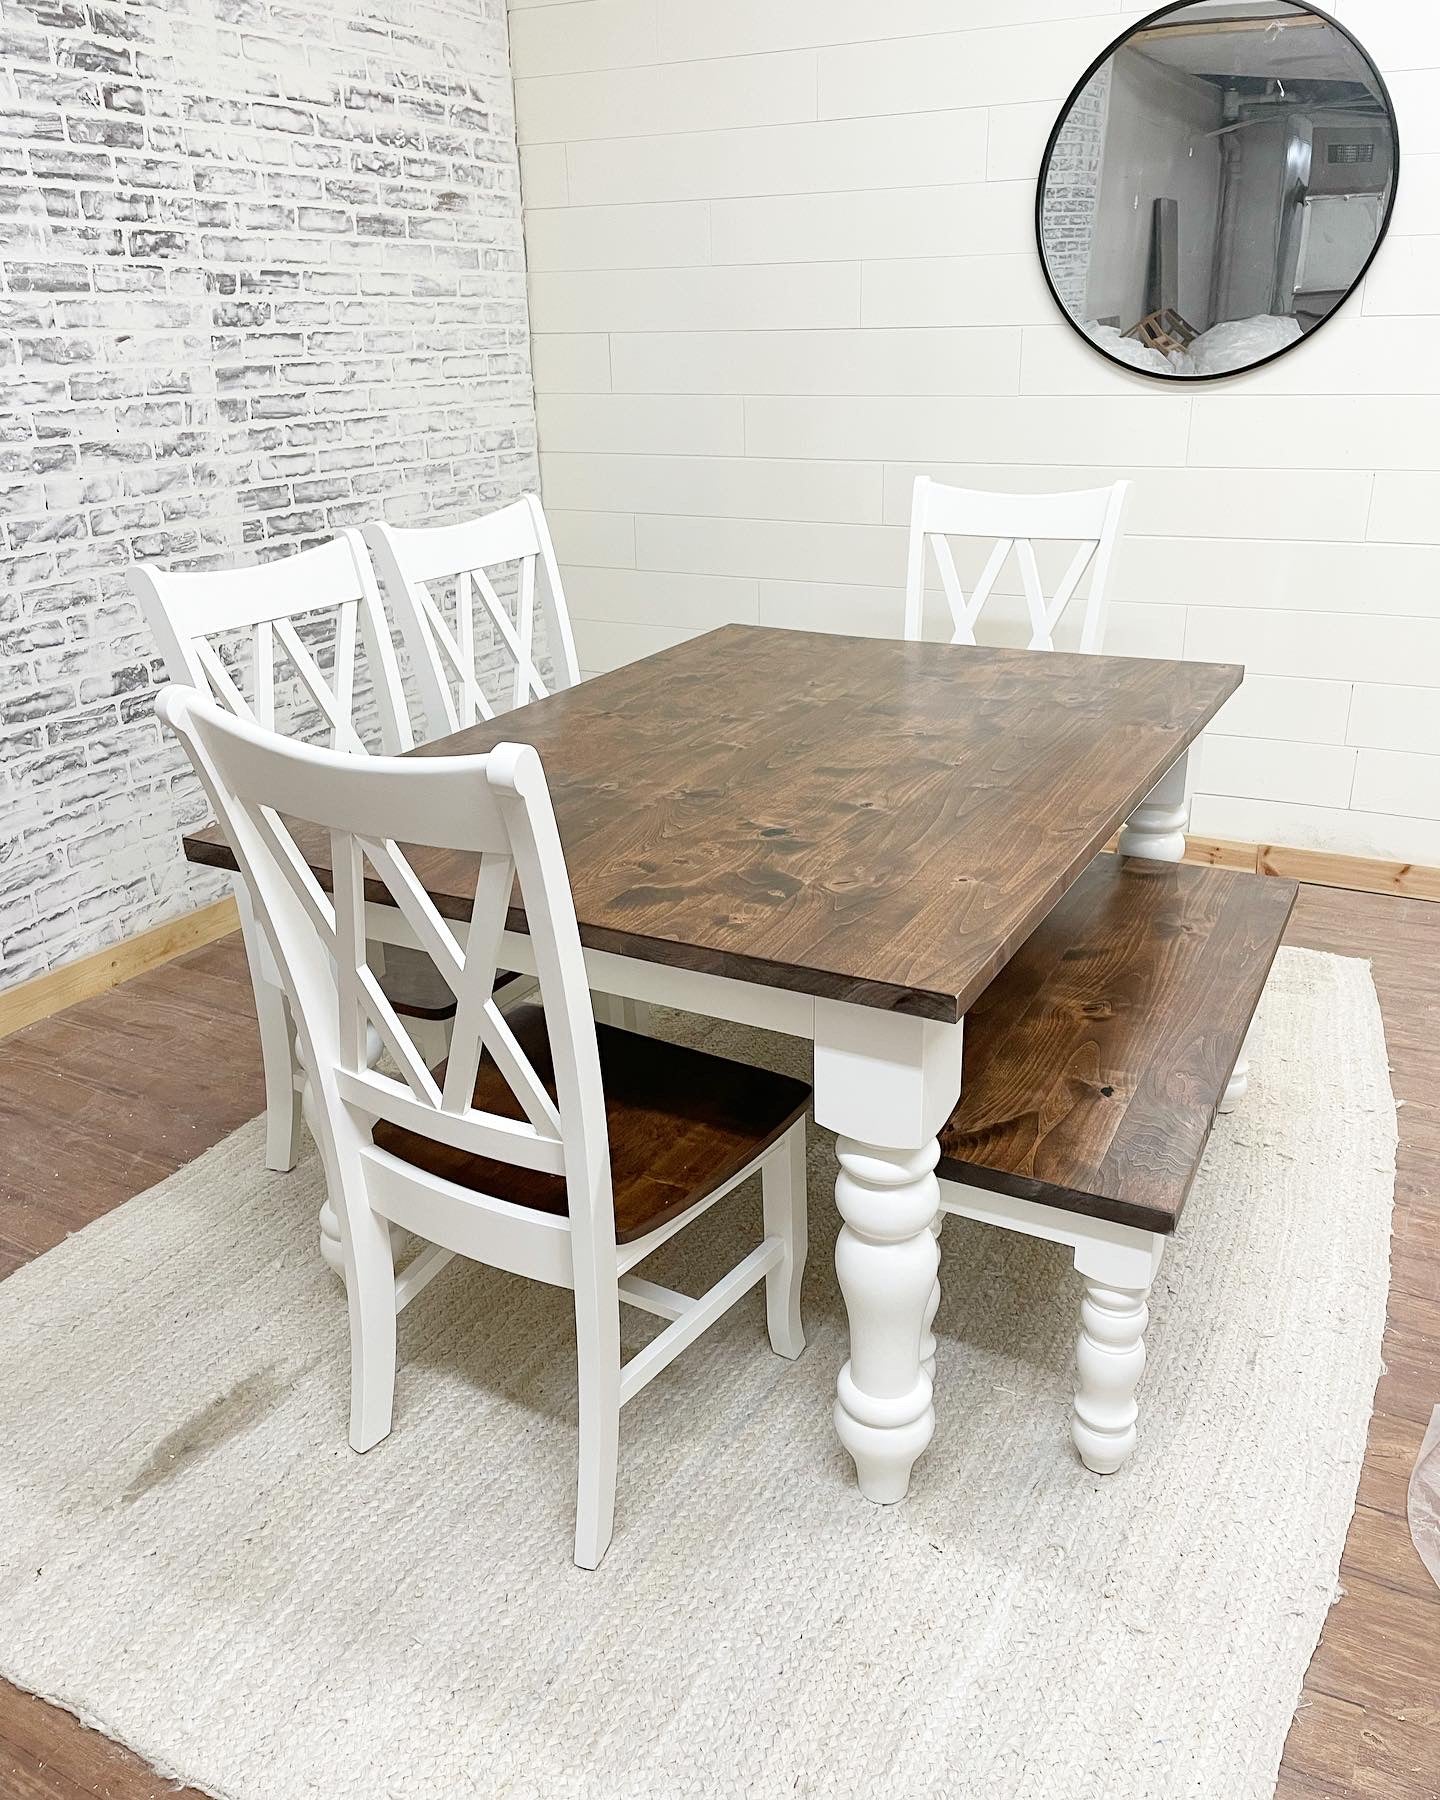 Pictured with a 5'L x 42"W Rustic Alder top stained Espresso with a painted White base. Pictured with a Matching Bench and 4 Double Cross Back Chairs.